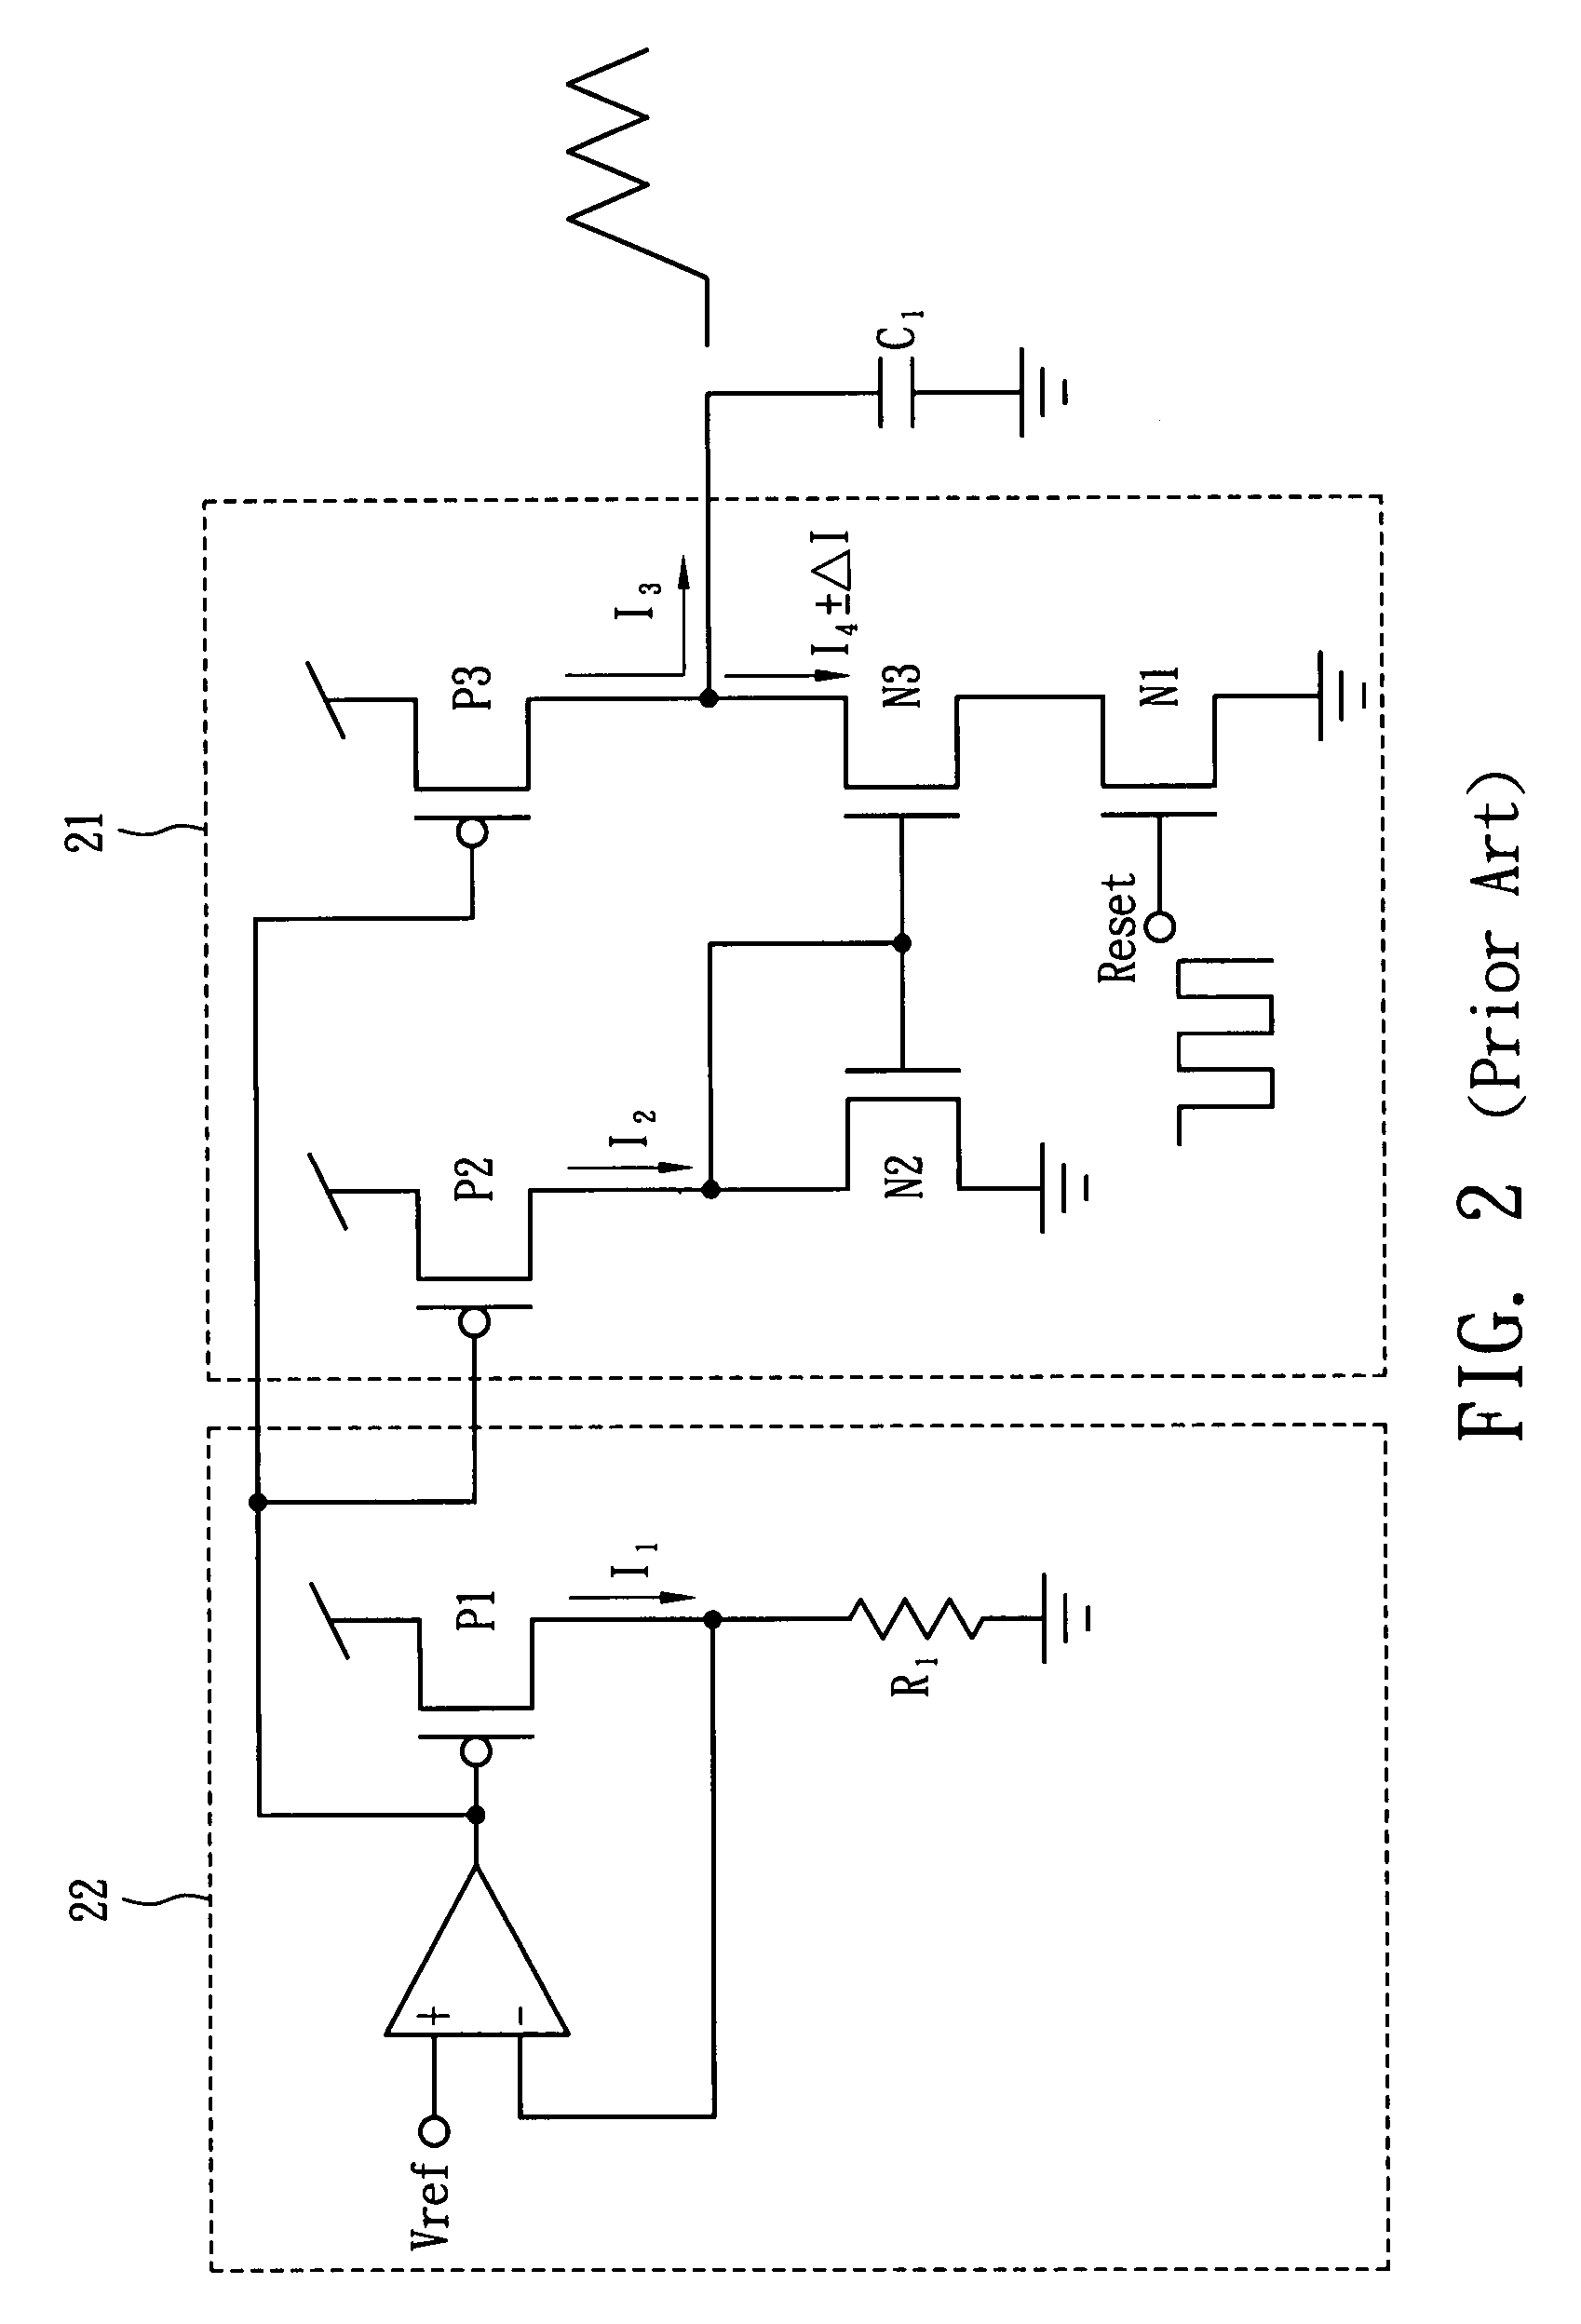 Oscillation circuit having current scaling relationship and the method for using the same